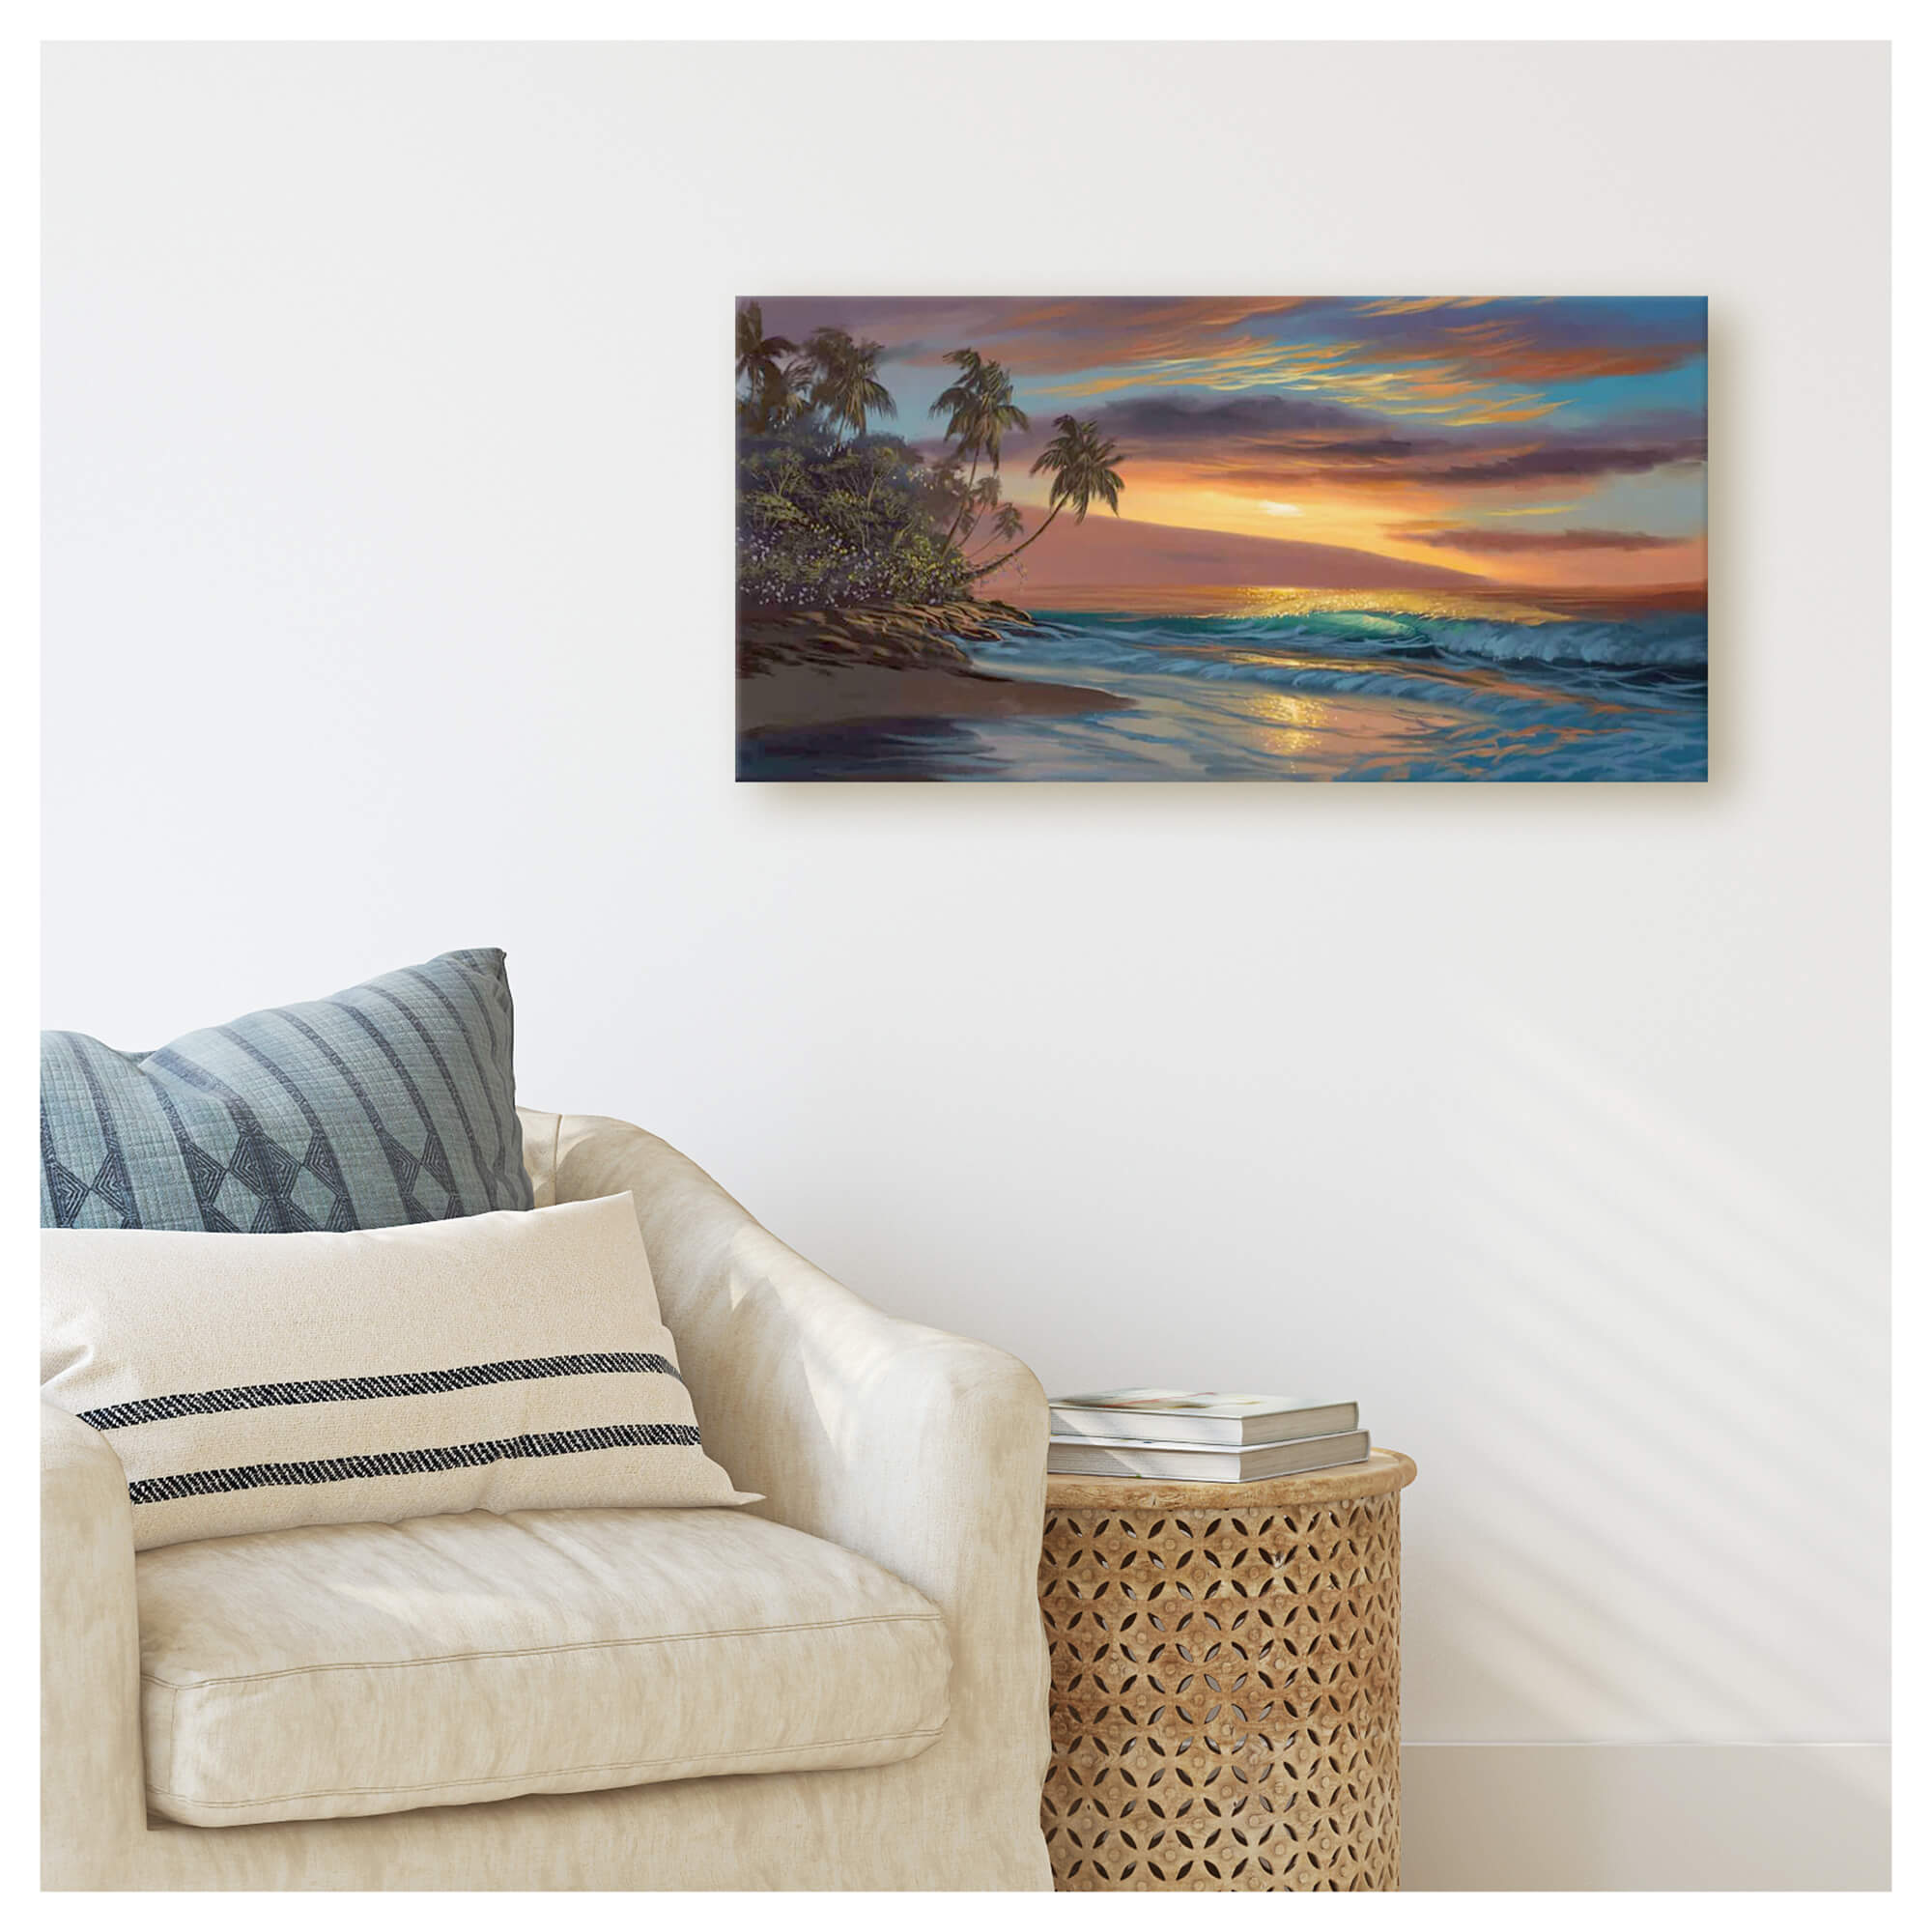 Original artwork of of the ocean and waves during a vivid sunset in a tropical setting by Hawaii artist Walfrido Garcia